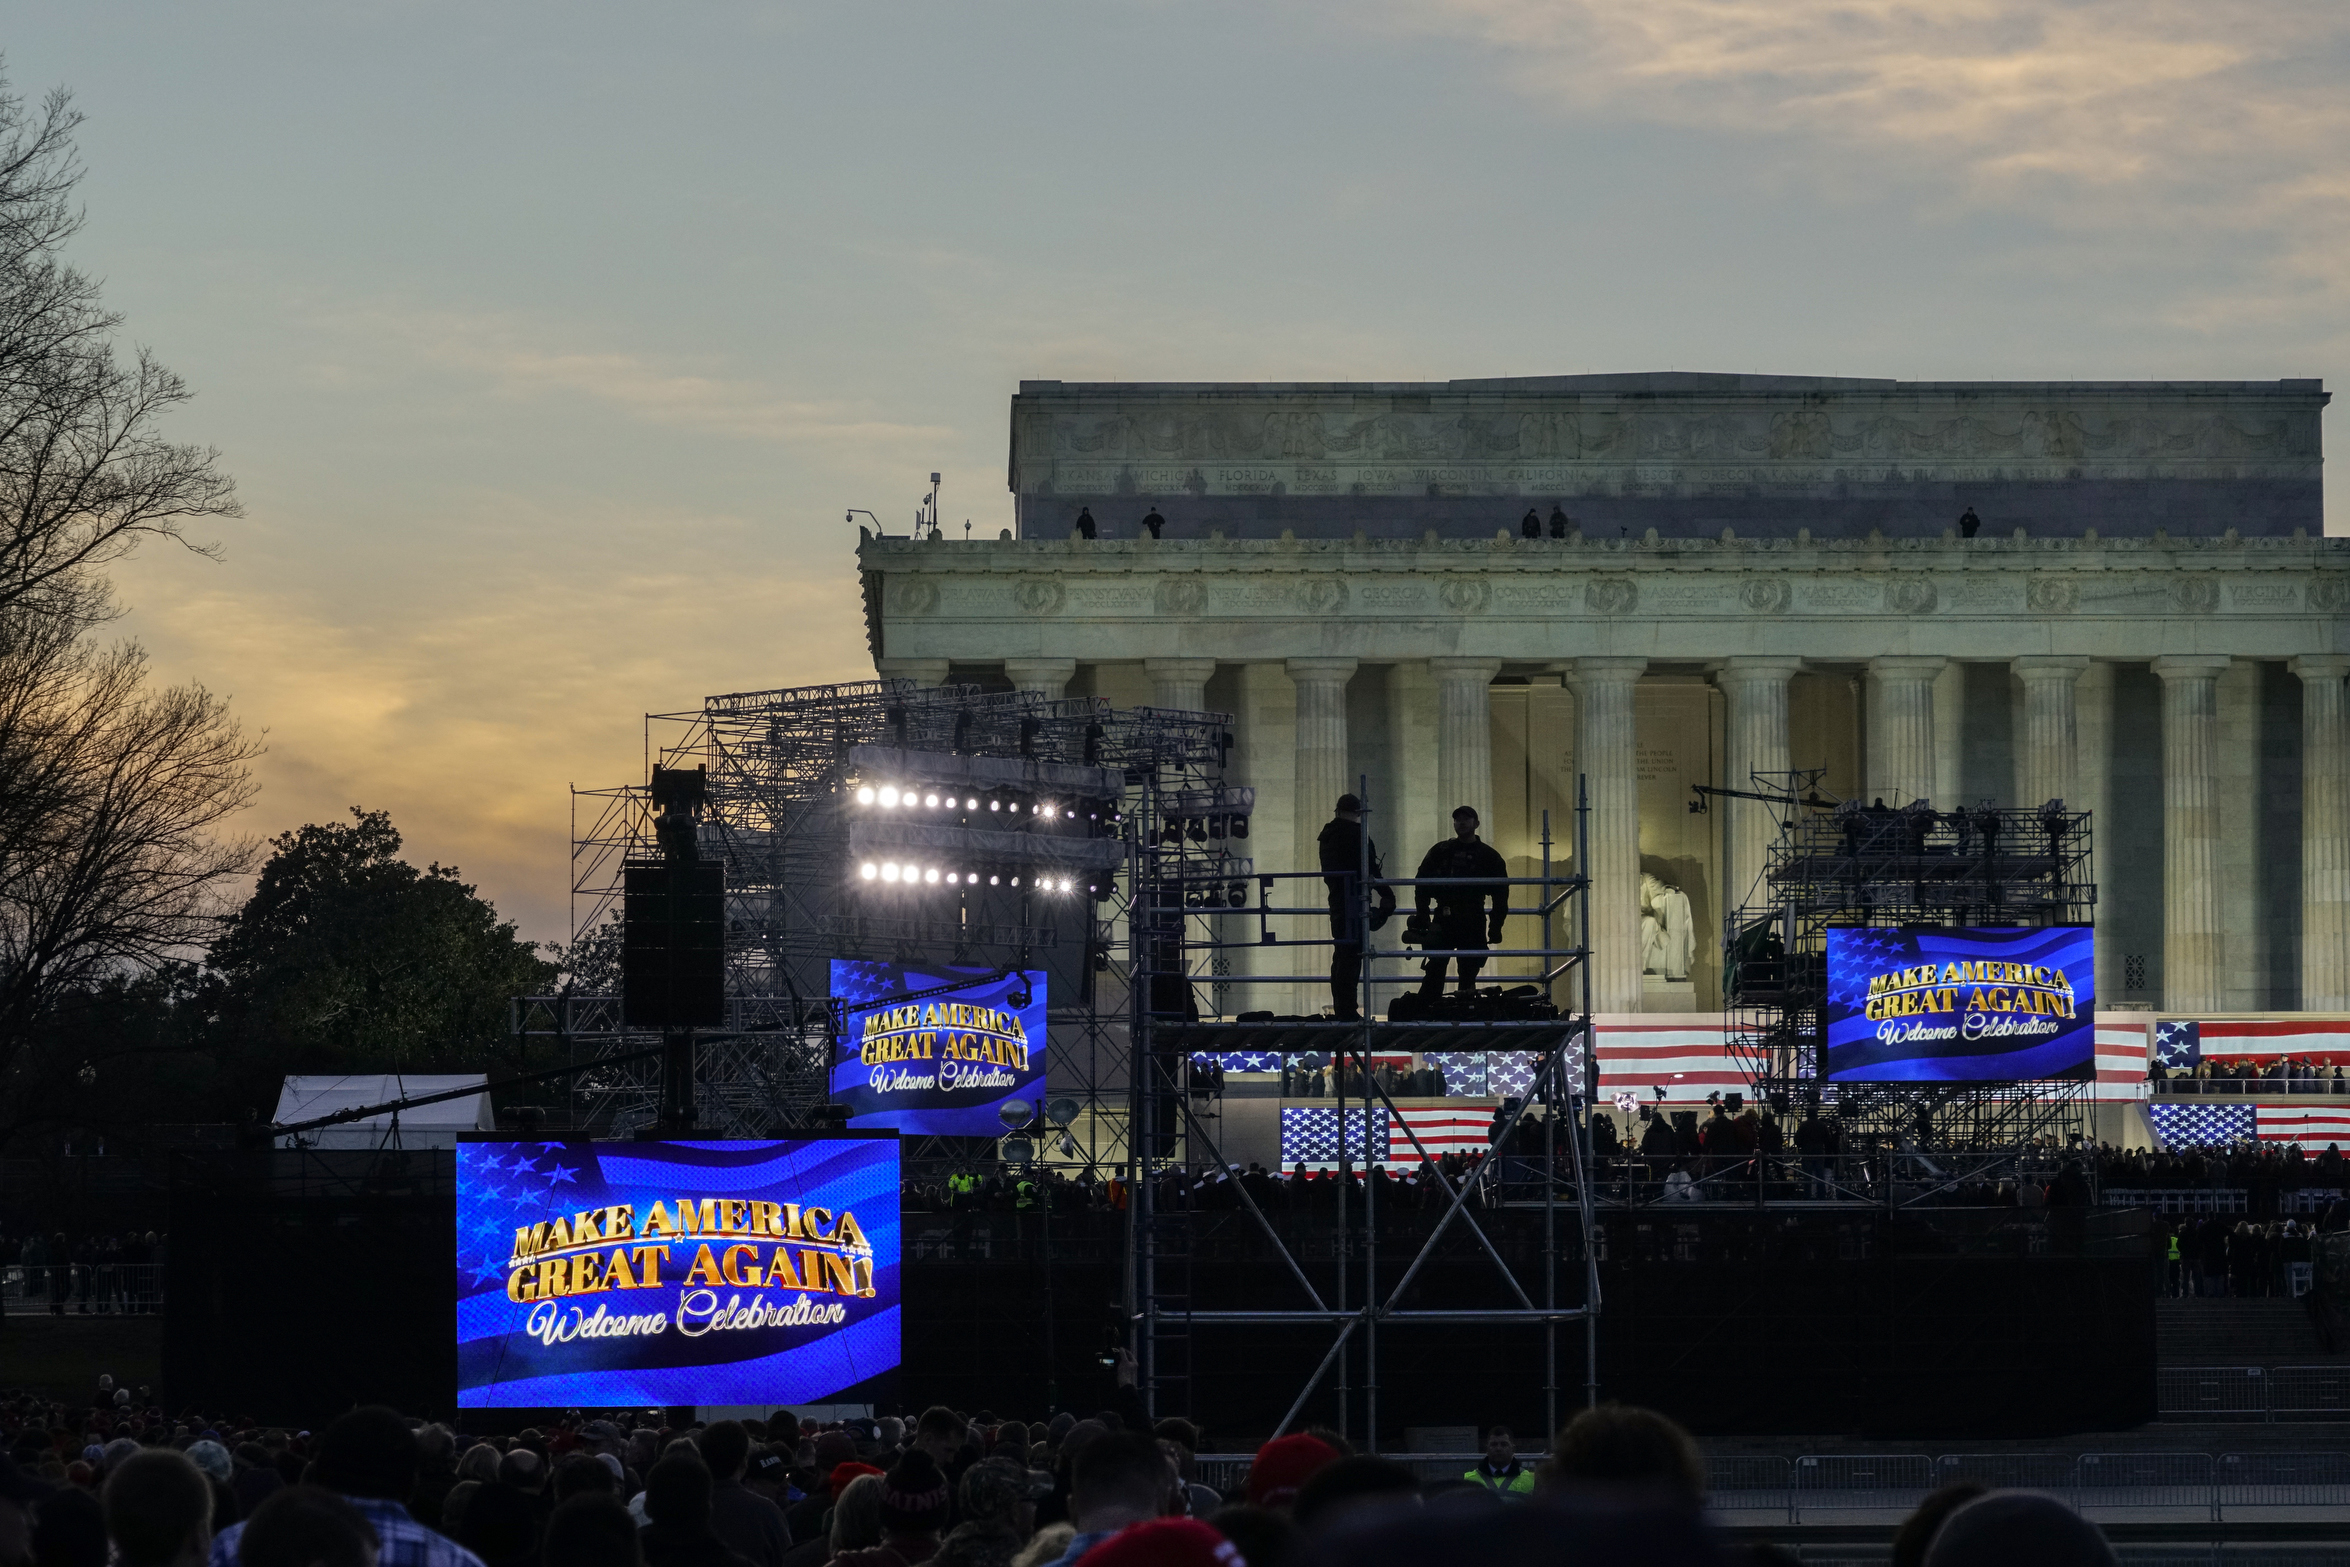 2017. Washington, DC. USA.  Security at the Voices of the People: Make America Great Again Welcome Concert at the Lincoln Memorial.